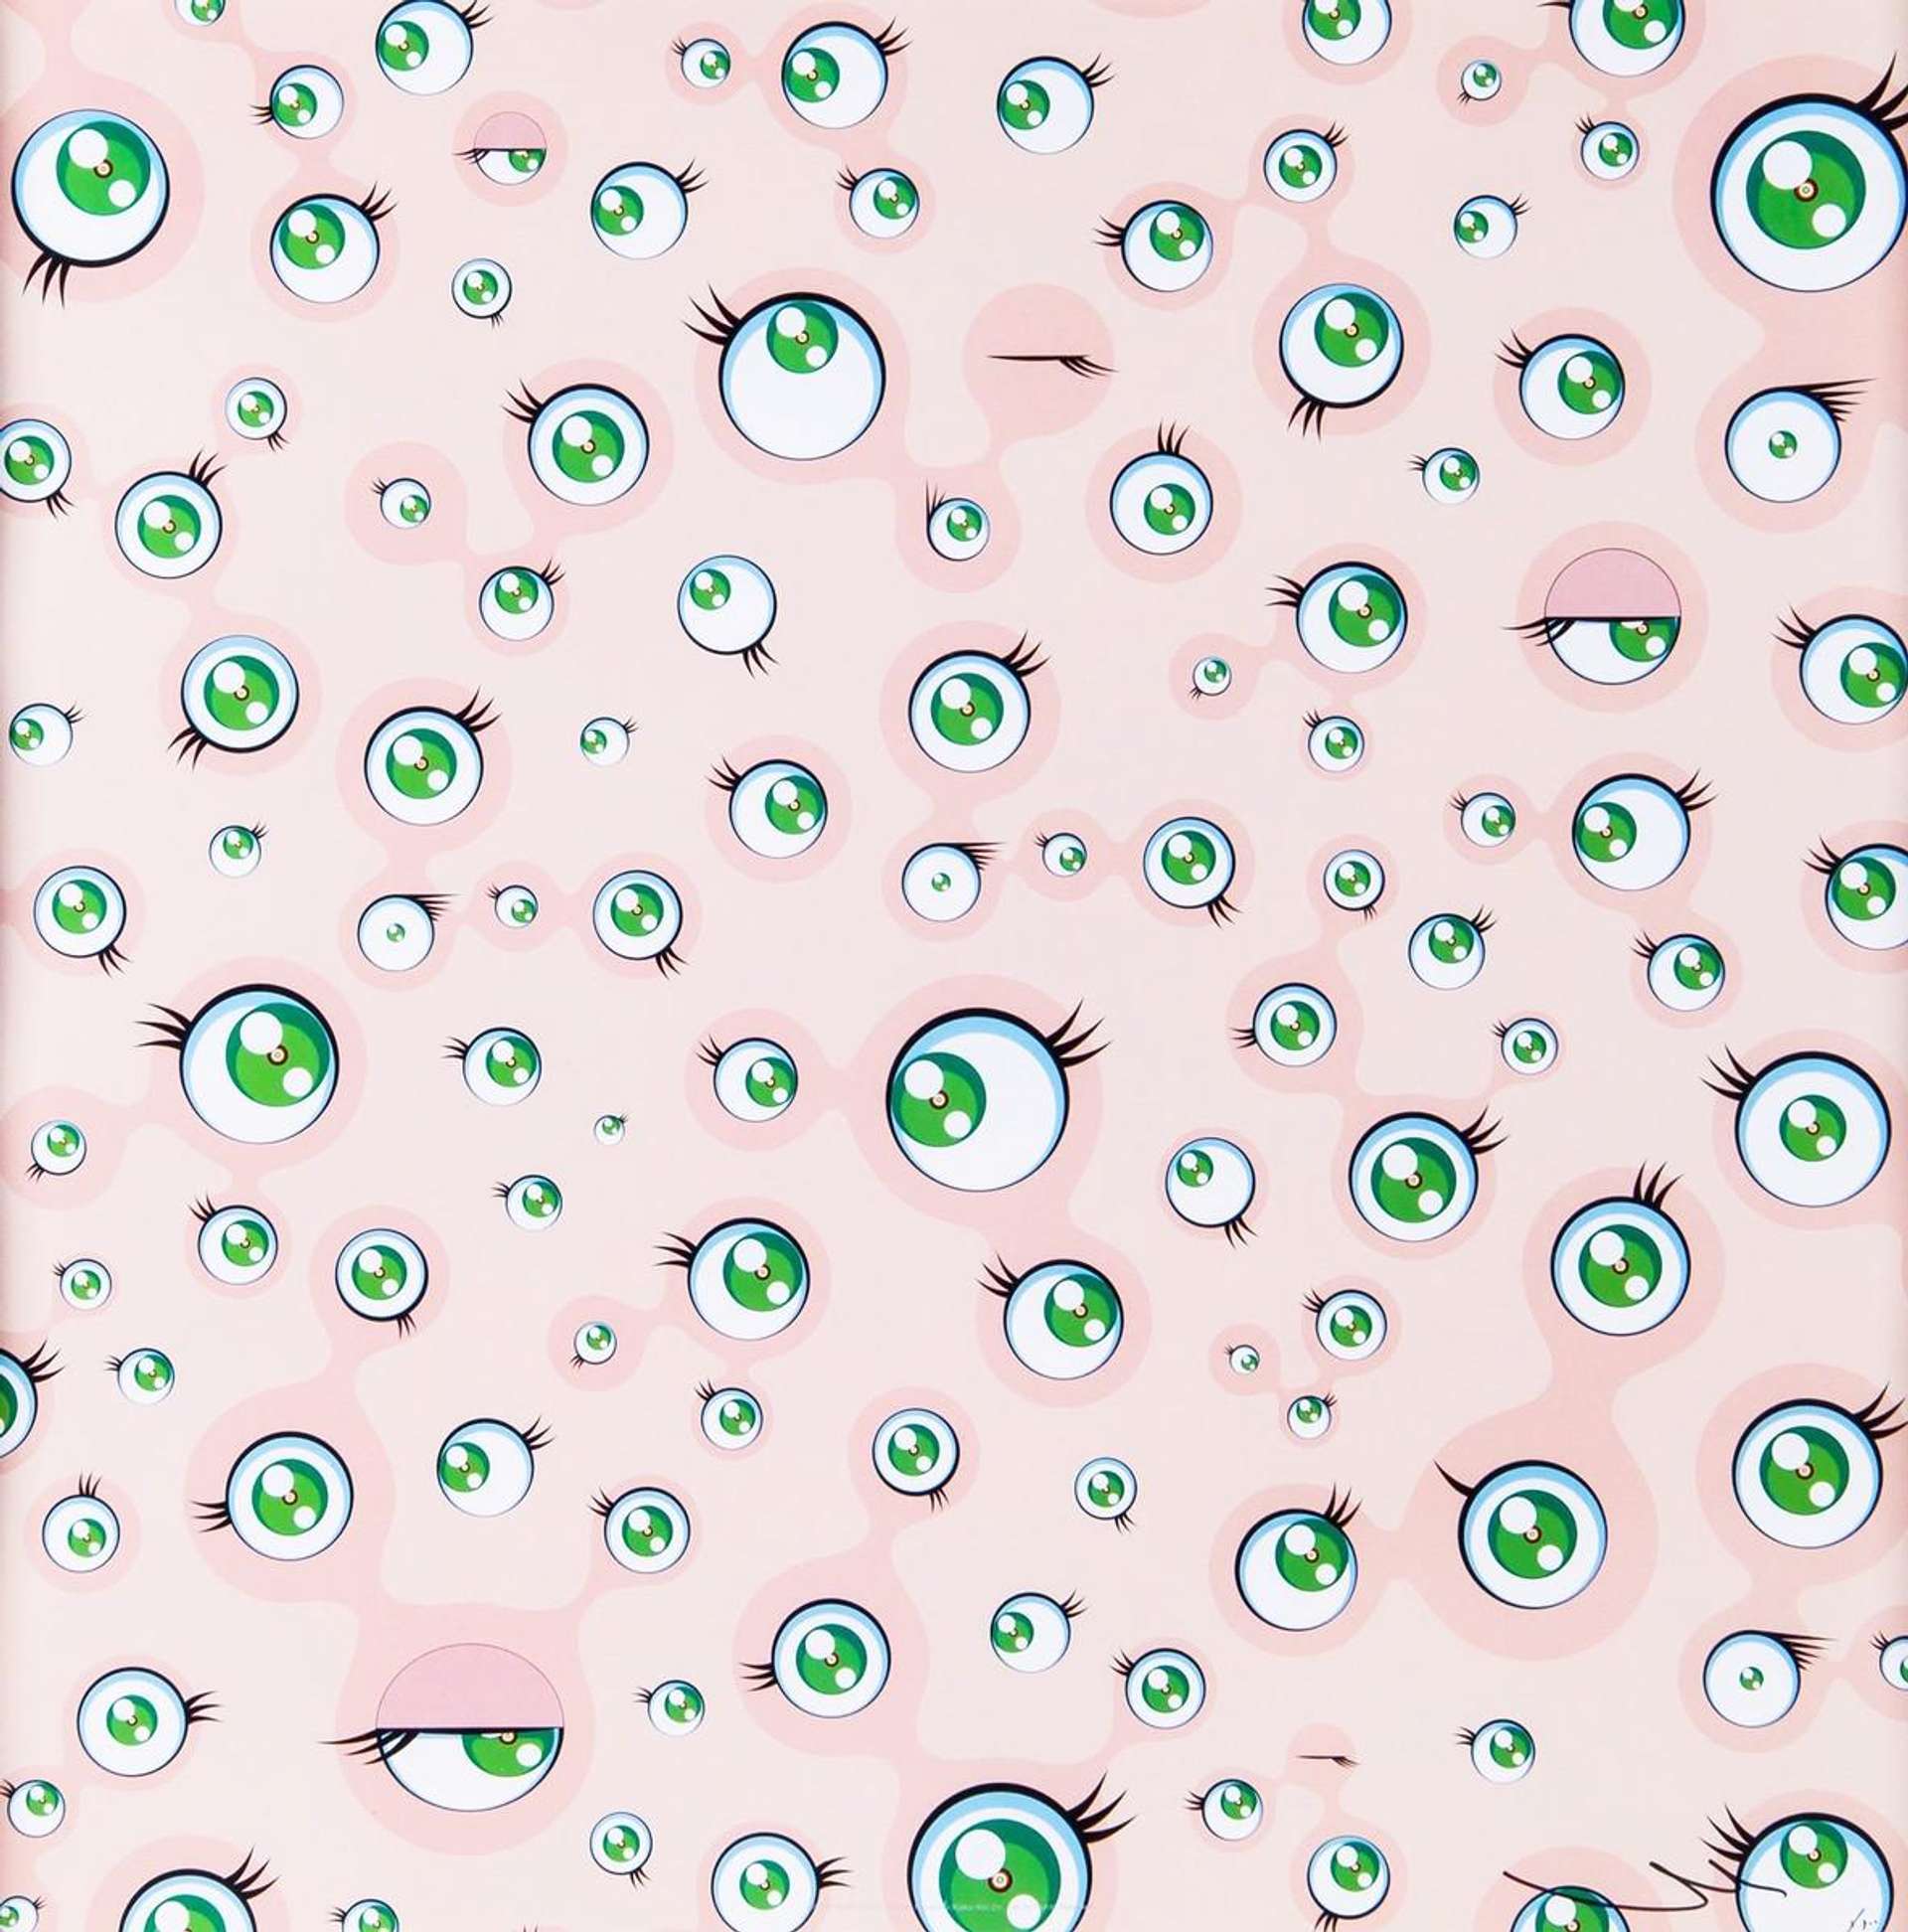 Various expressions of open green eyes against a light pink background